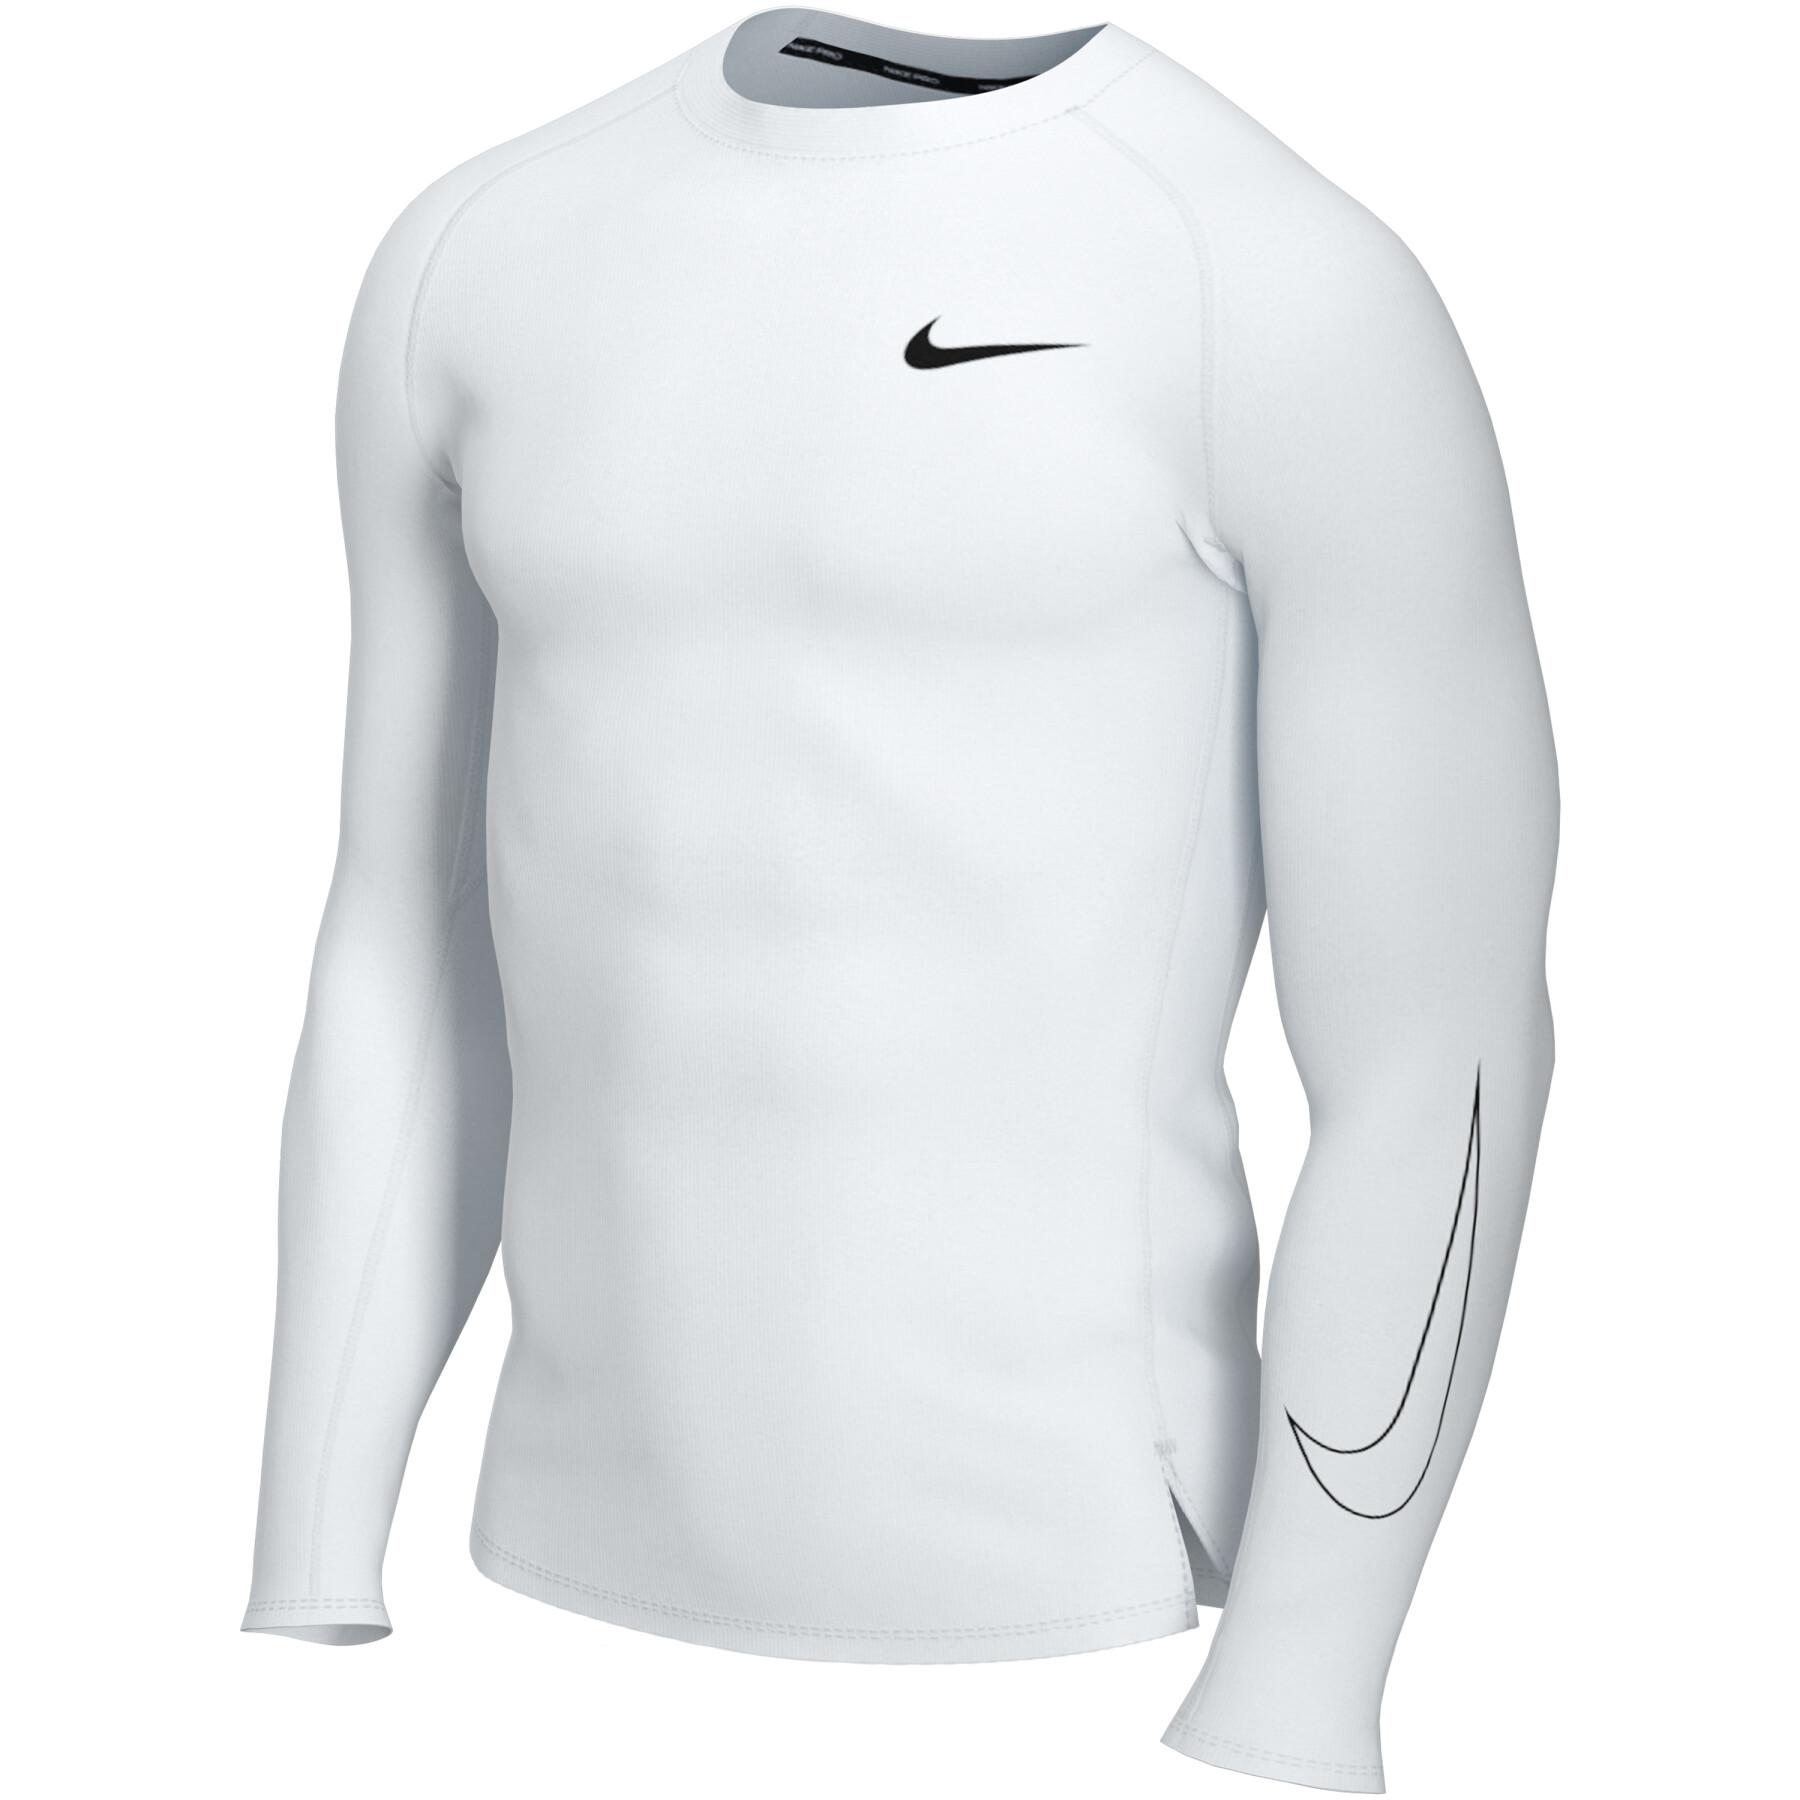 Long sleeve compression jersey Nike NP Dri-Fit - Compression garments - -